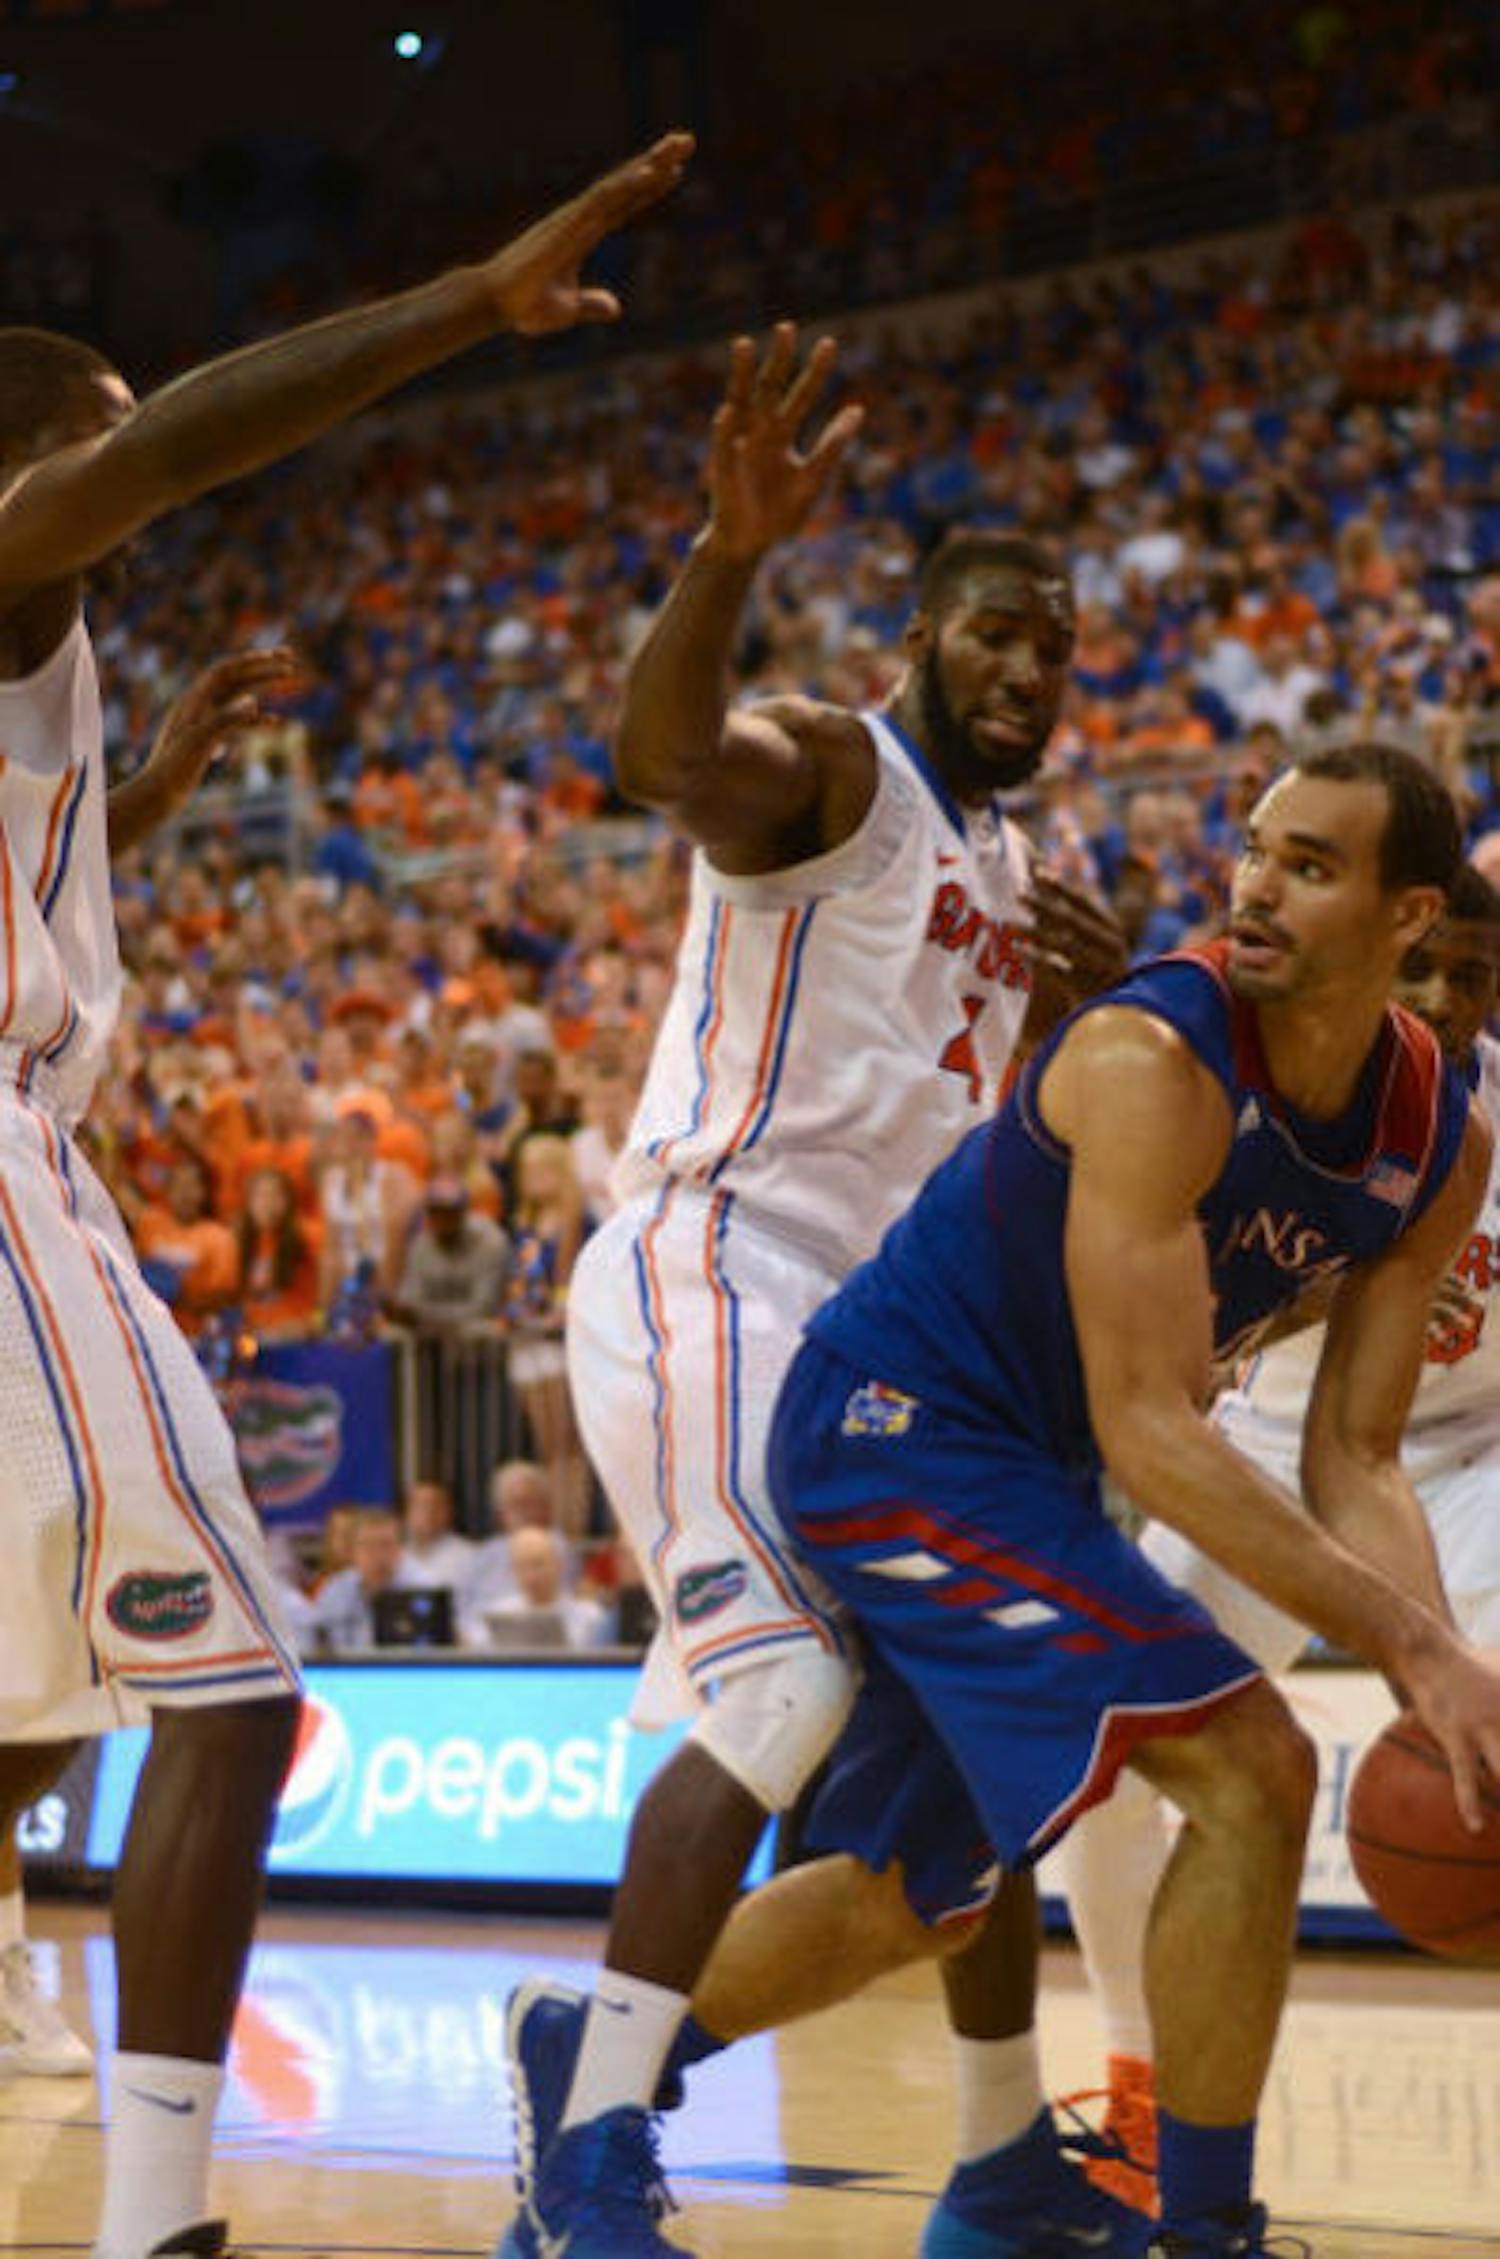 Gators senior center Patric Young (4) defends Kansas forward Perry Ellis during No. 19 Florida's 67-61 win against No. 13 Kansas on Tuesday night in the O'Connell Center.